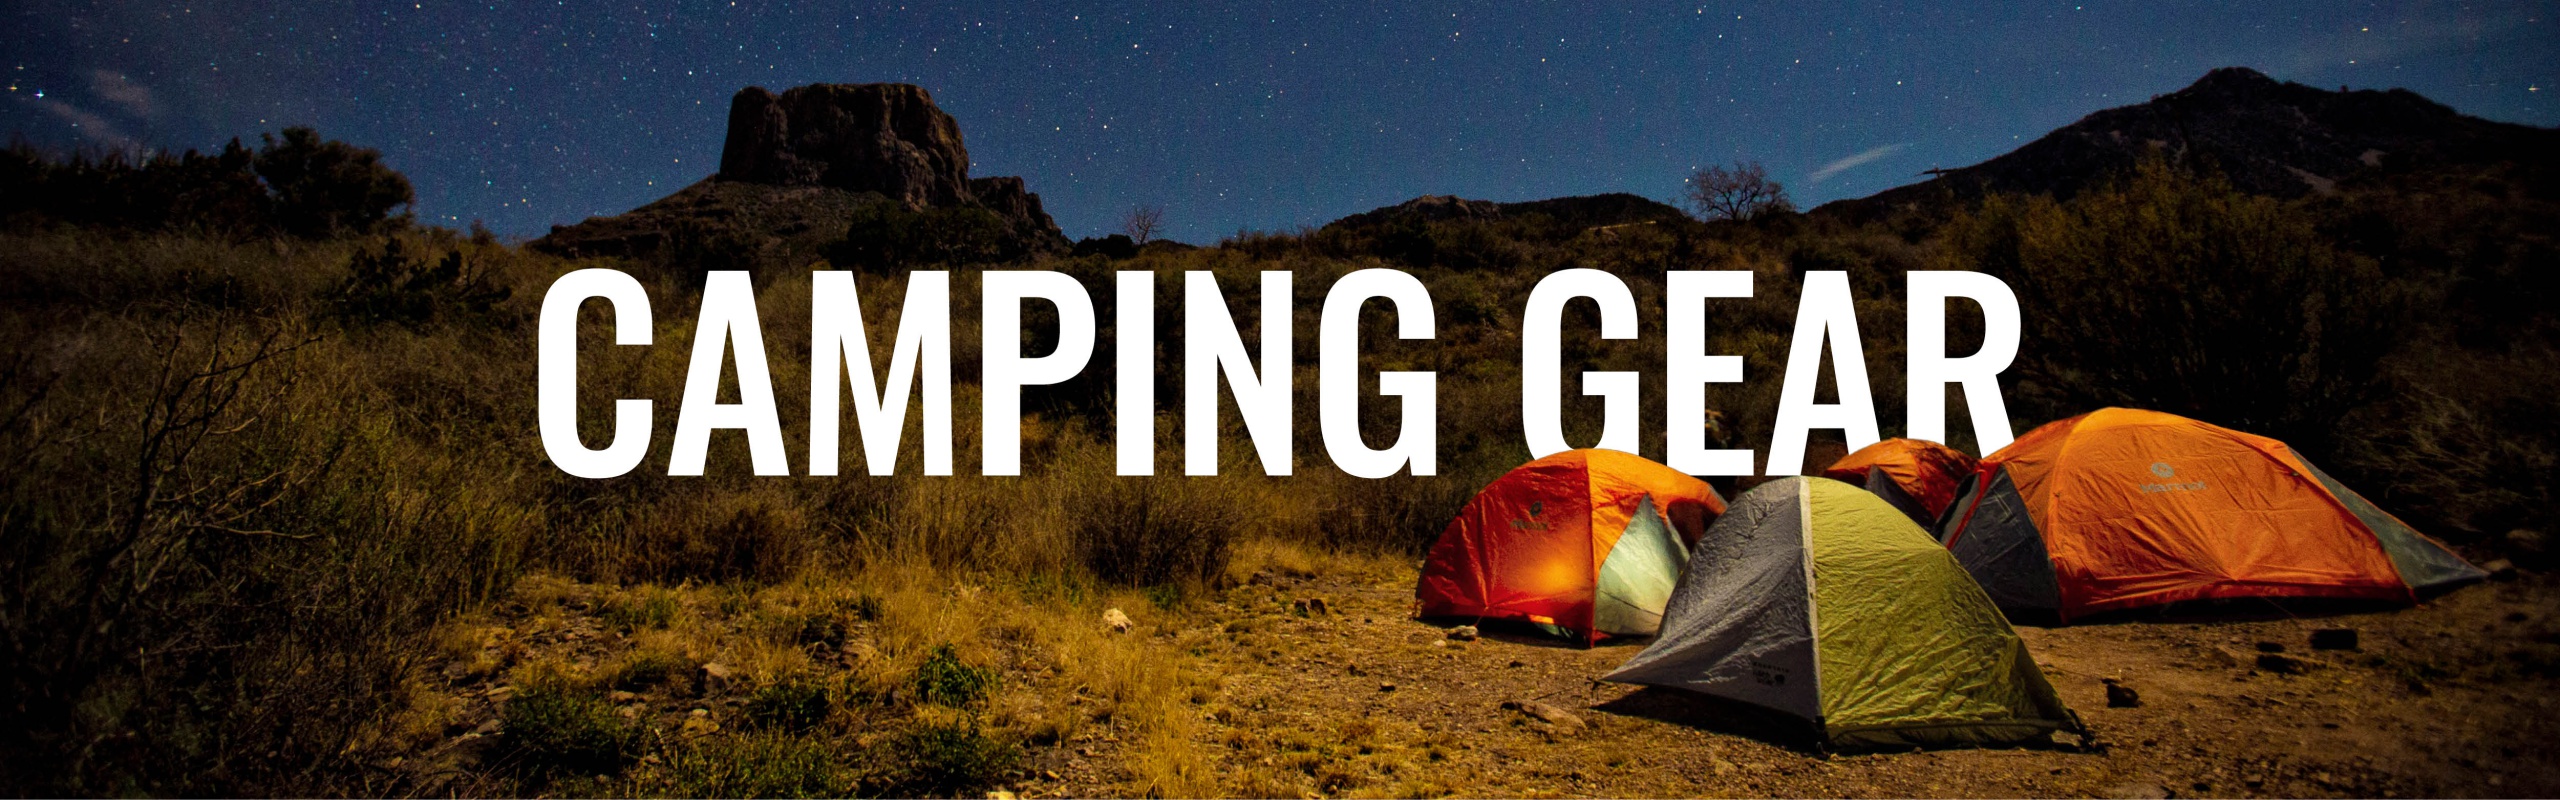 Photo of three tents set up at a park at night with text in the background saying camping gear.